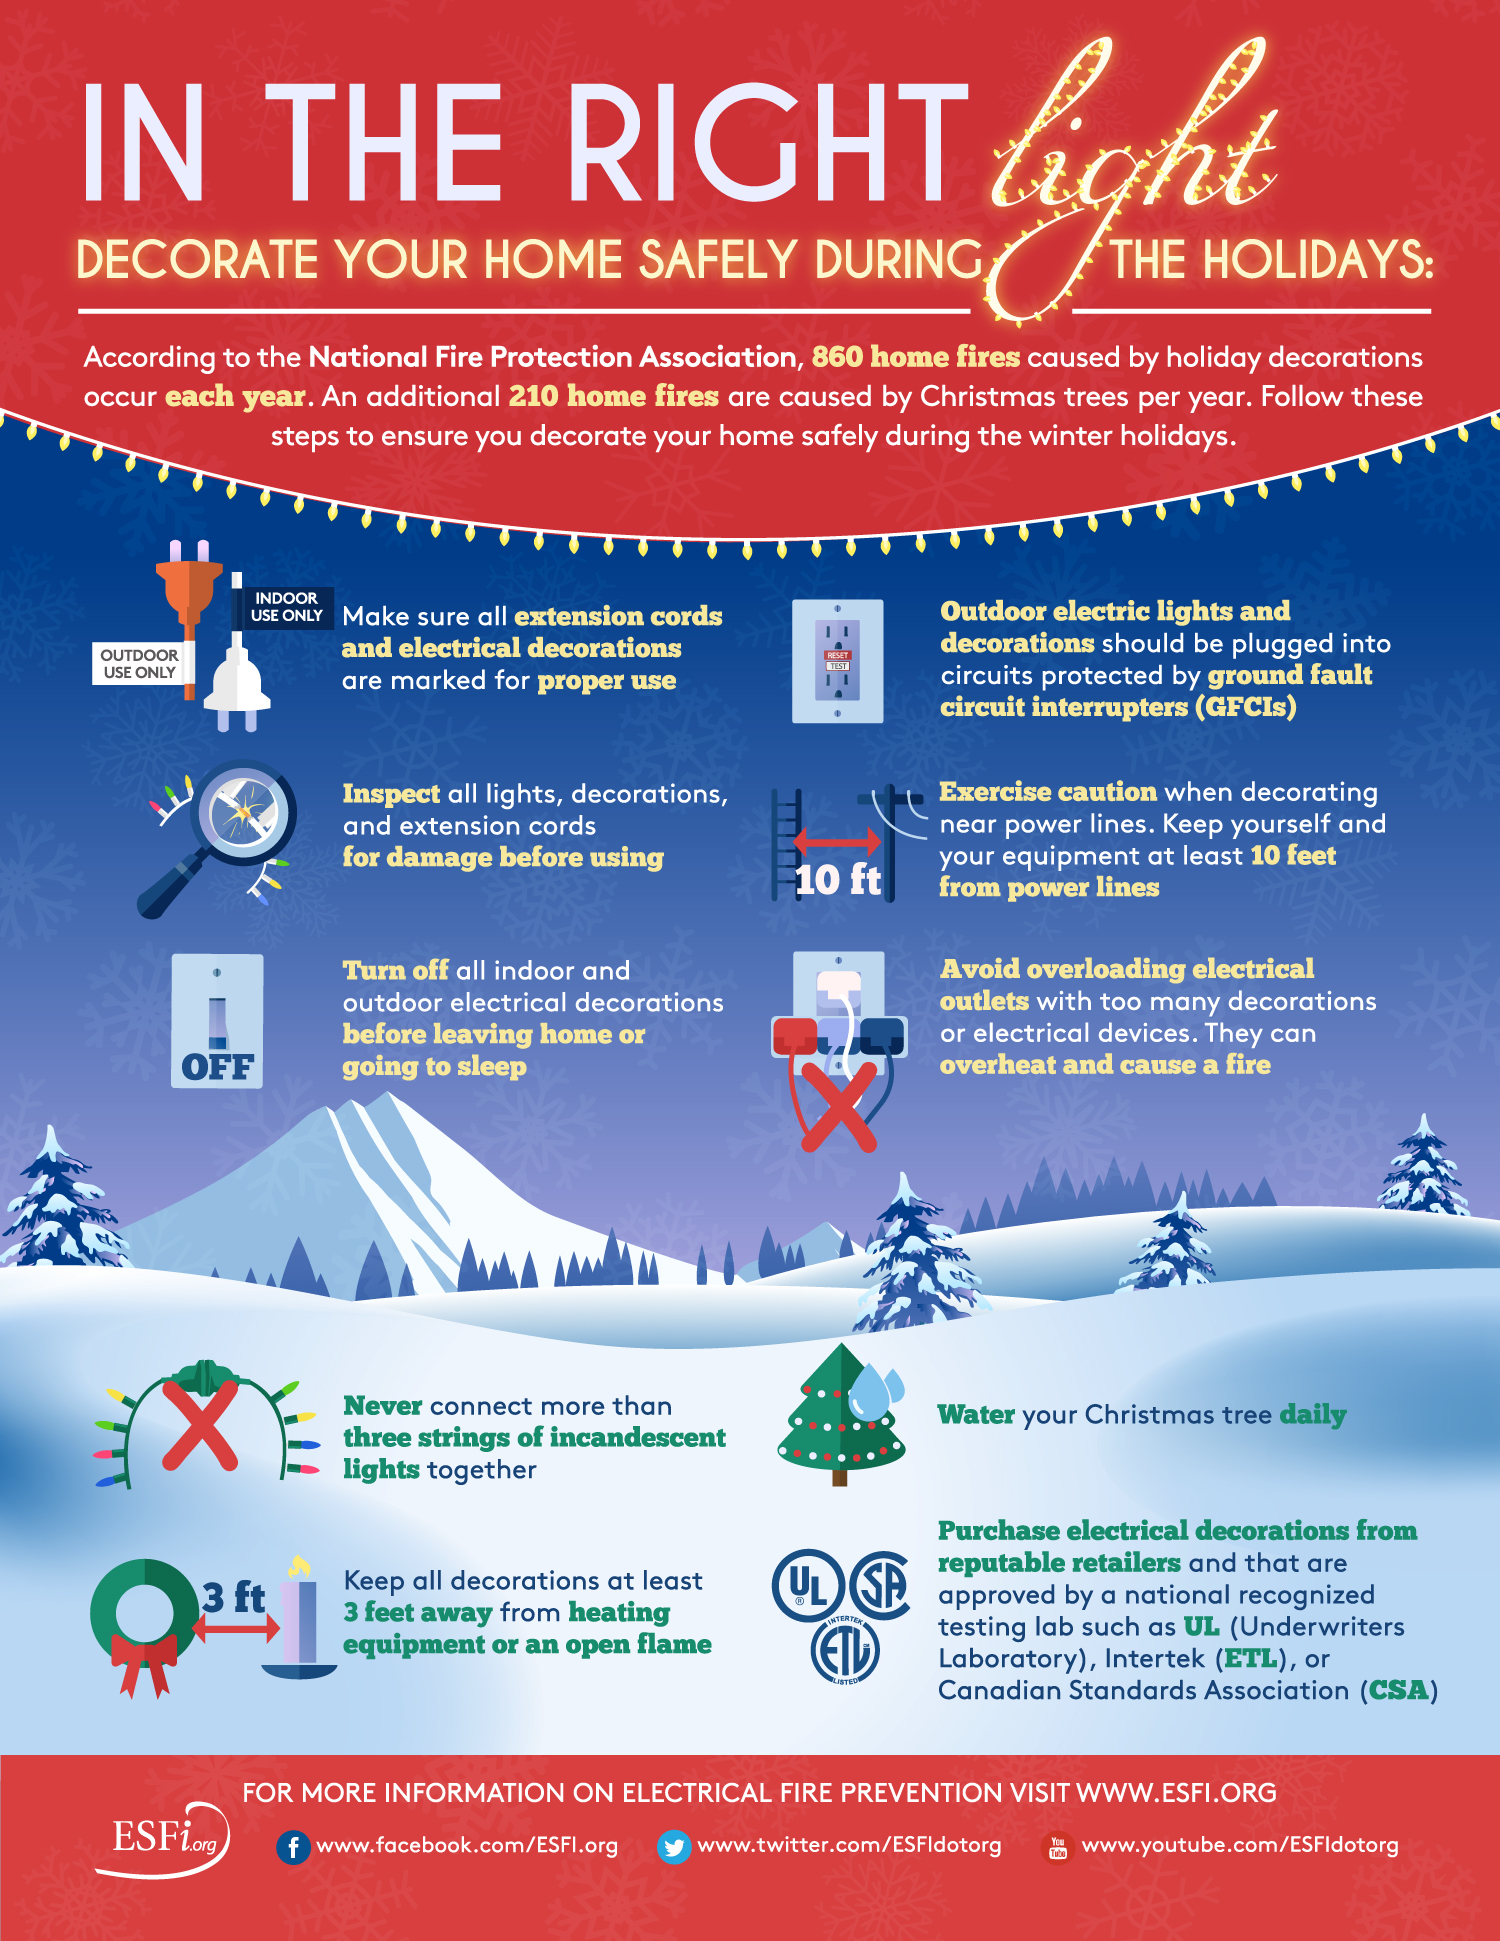 In the Right Light: Decorate Your Home Safely for the Holidays